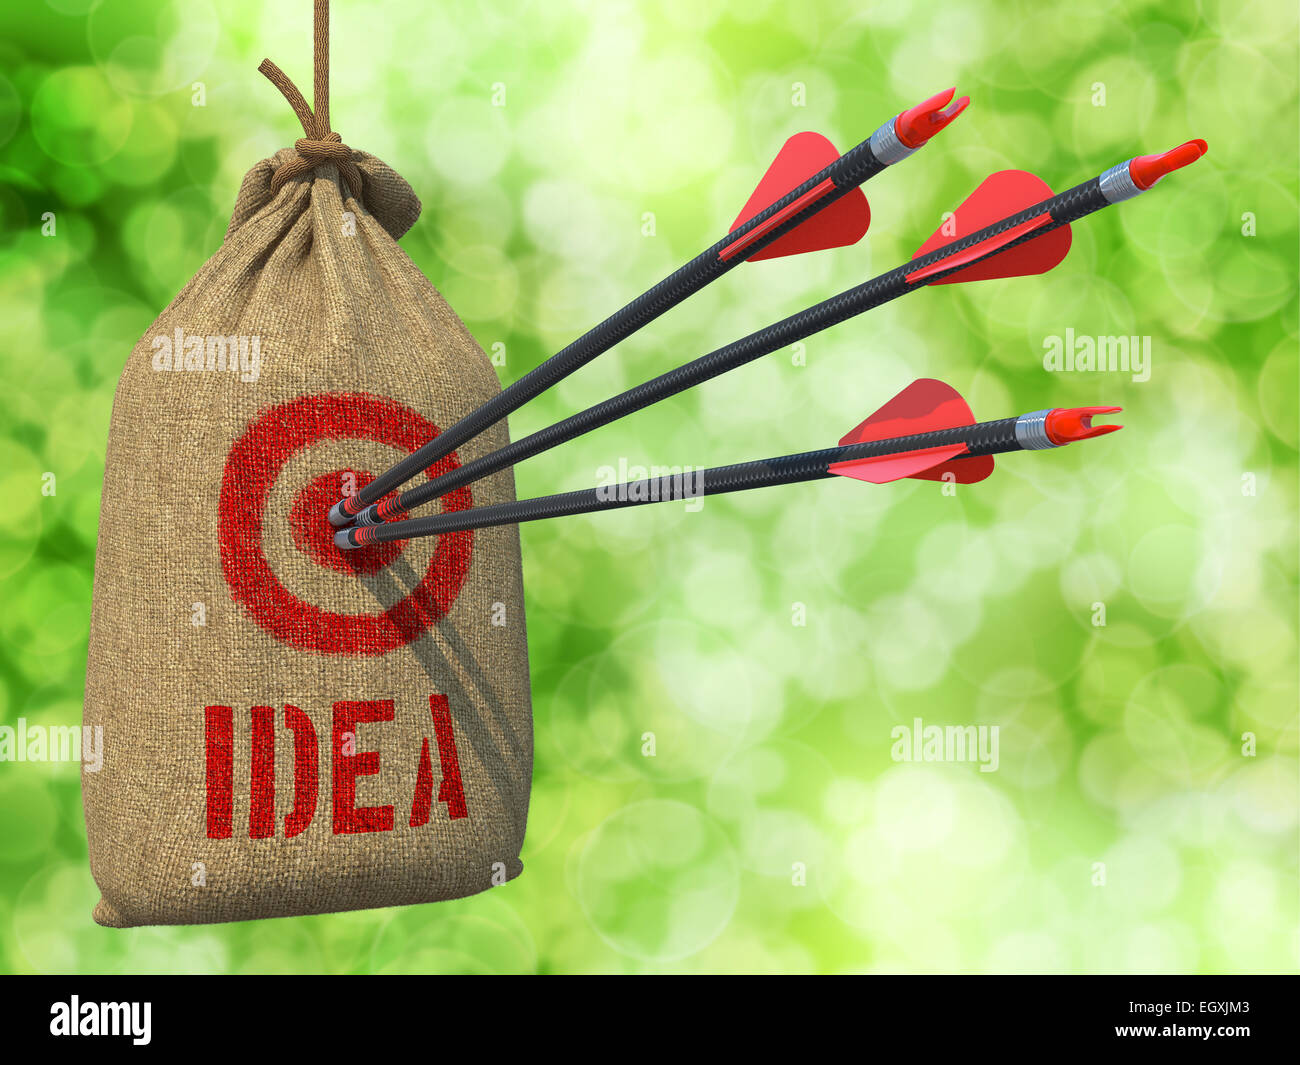 Idea - Arrows Hit in Red Target. Stock Photo